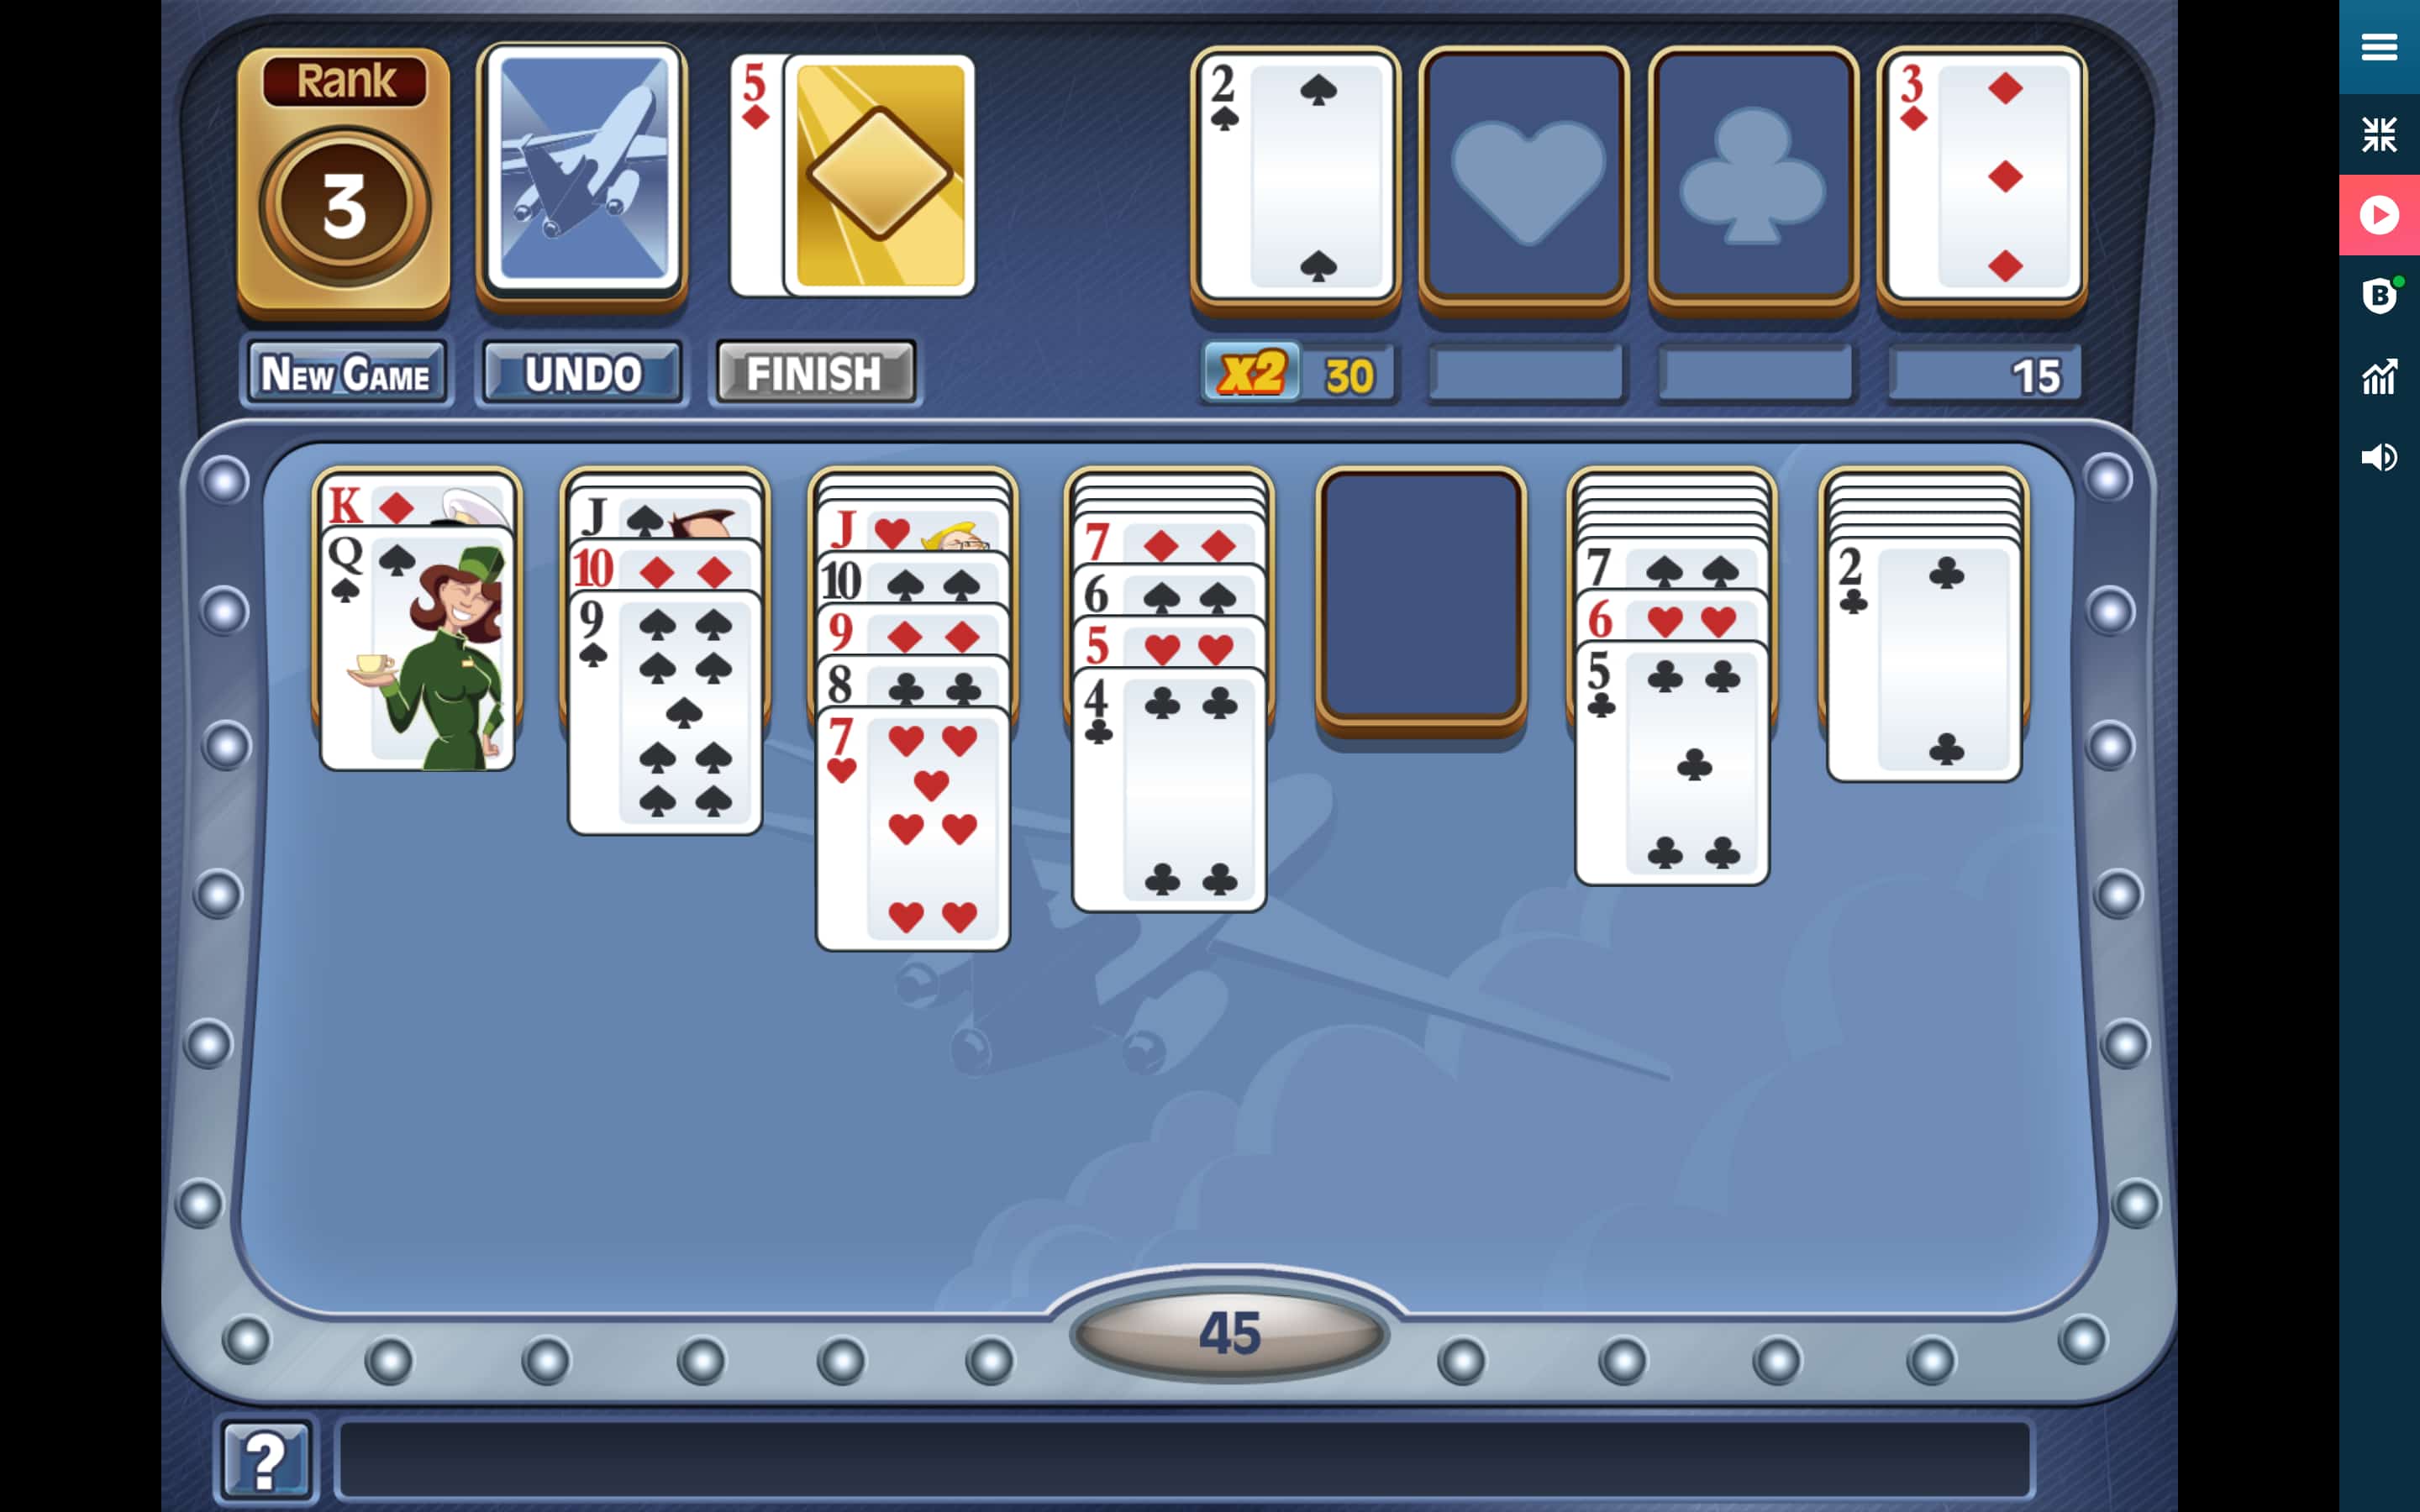 free card games online solitaire